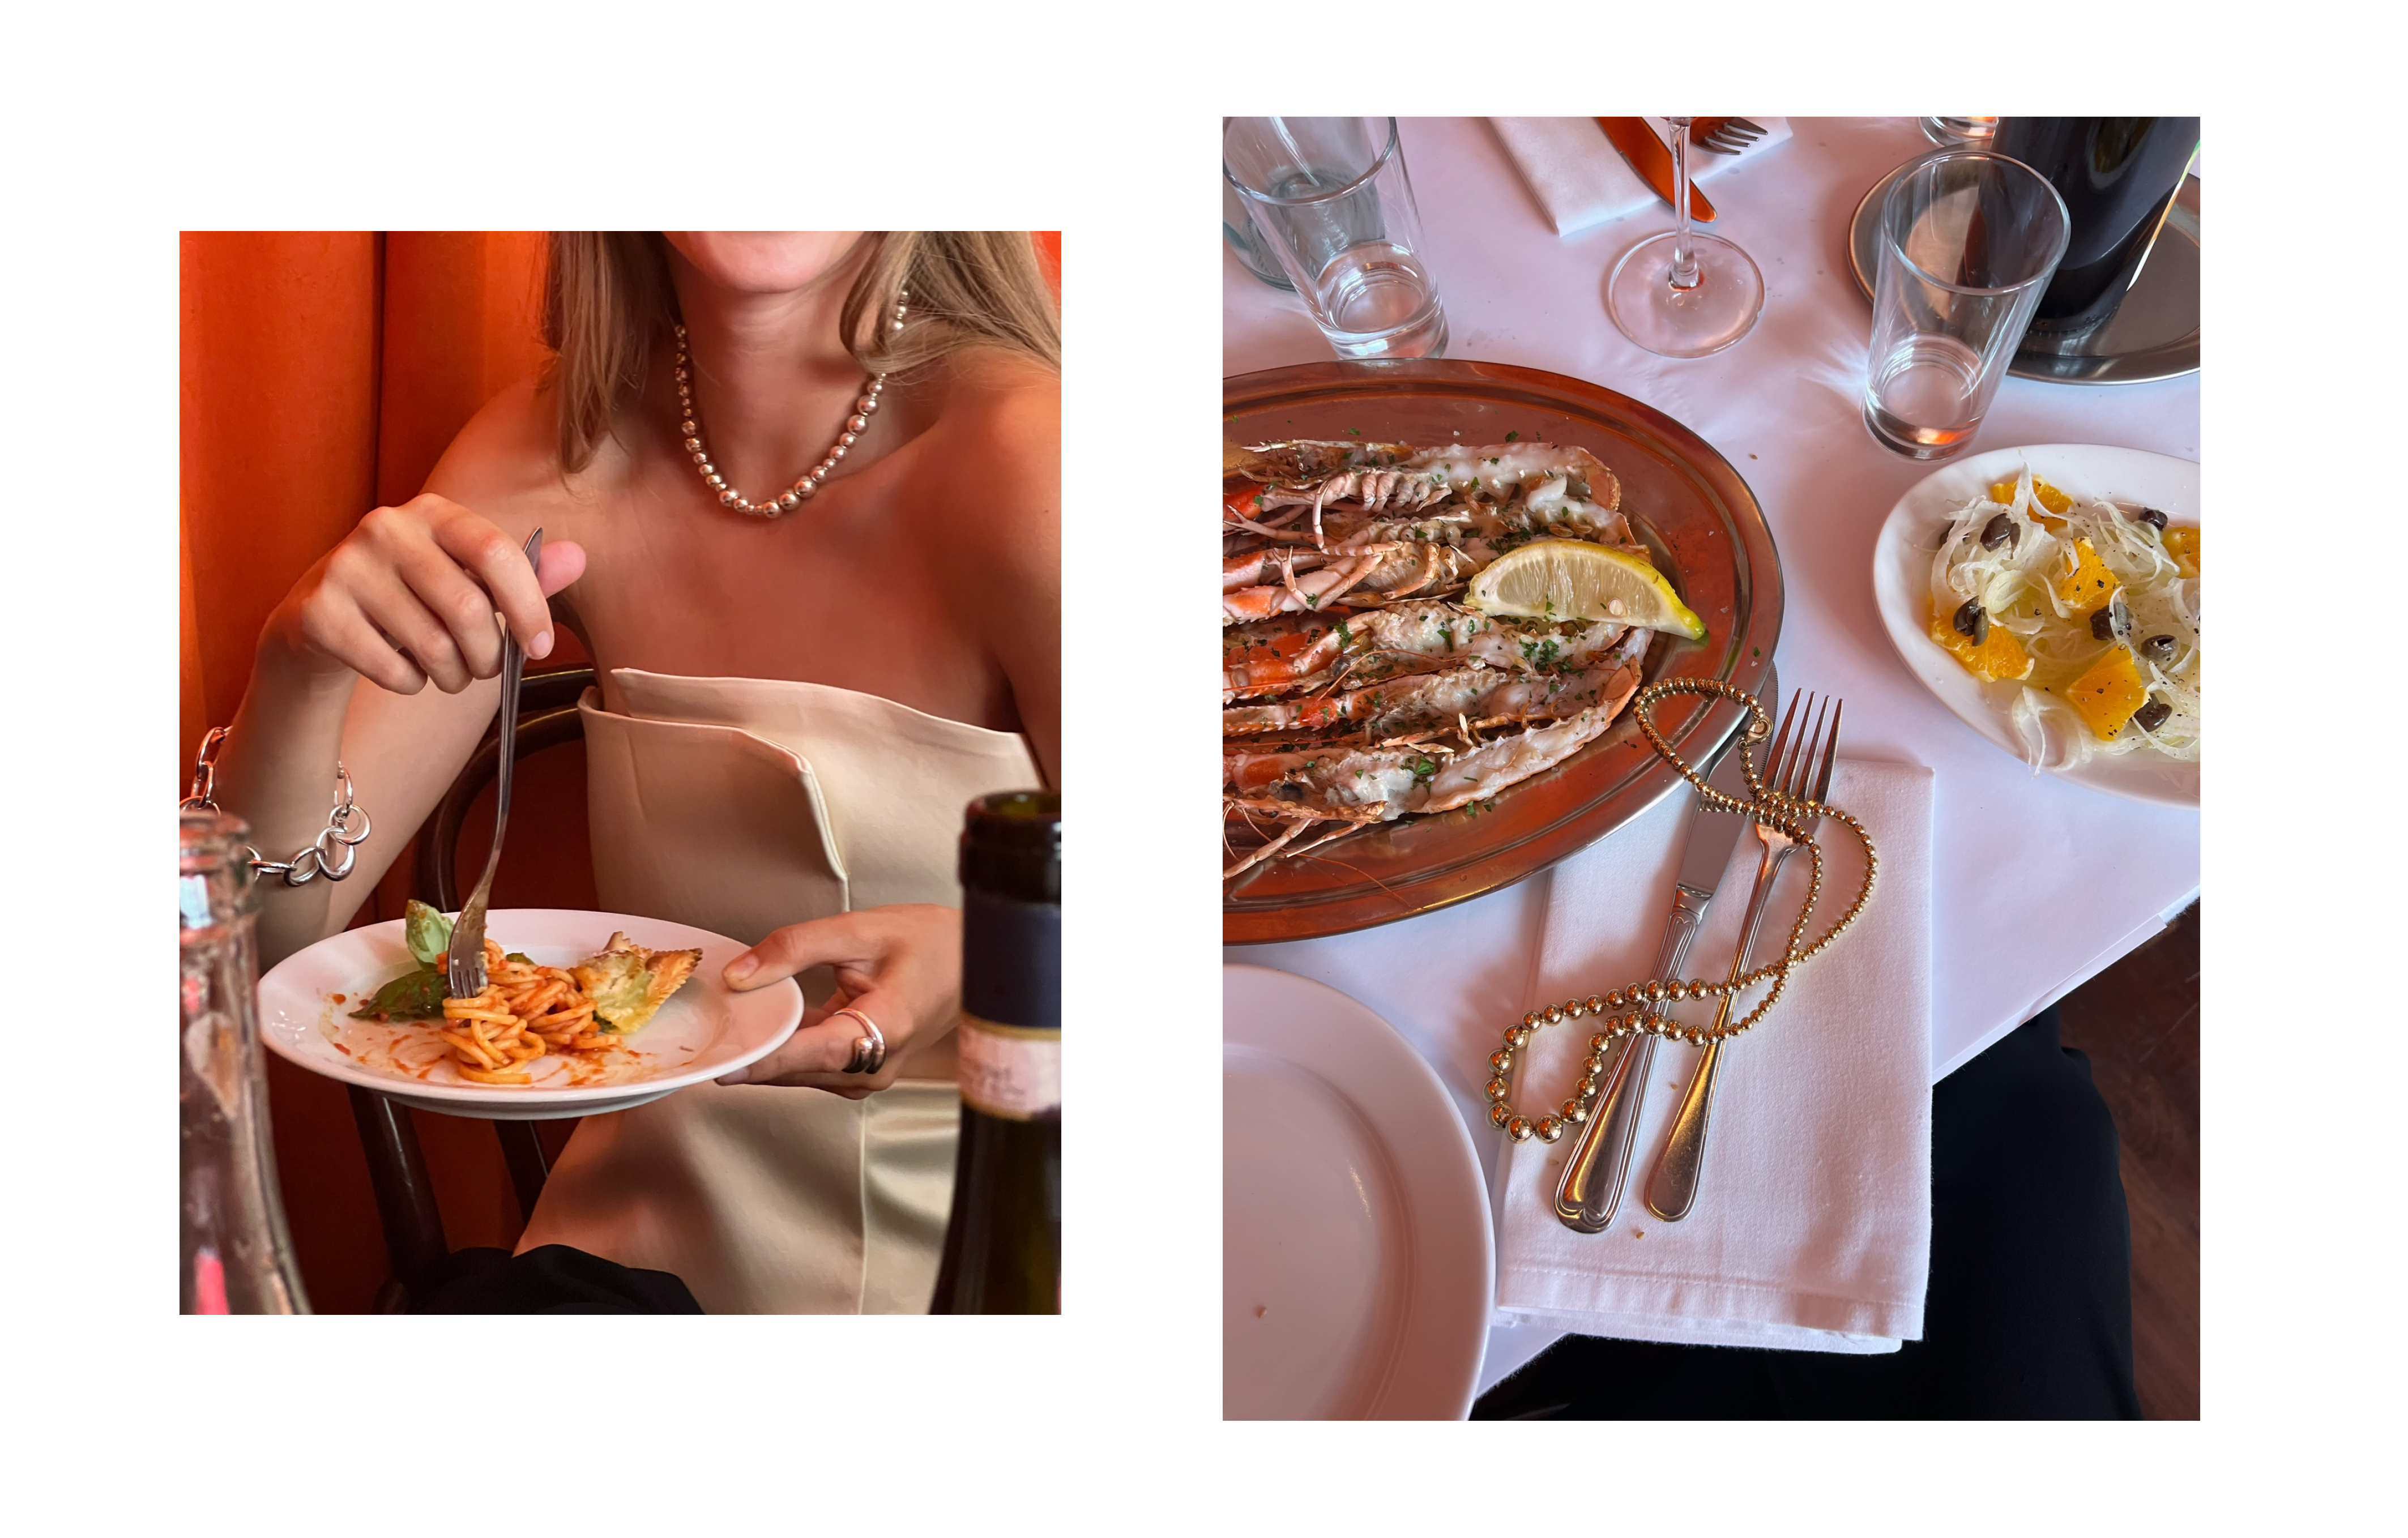 The Holiday Drop was shot at the restaurant Bar La Una, serving us some lovely dishes for the shoot.